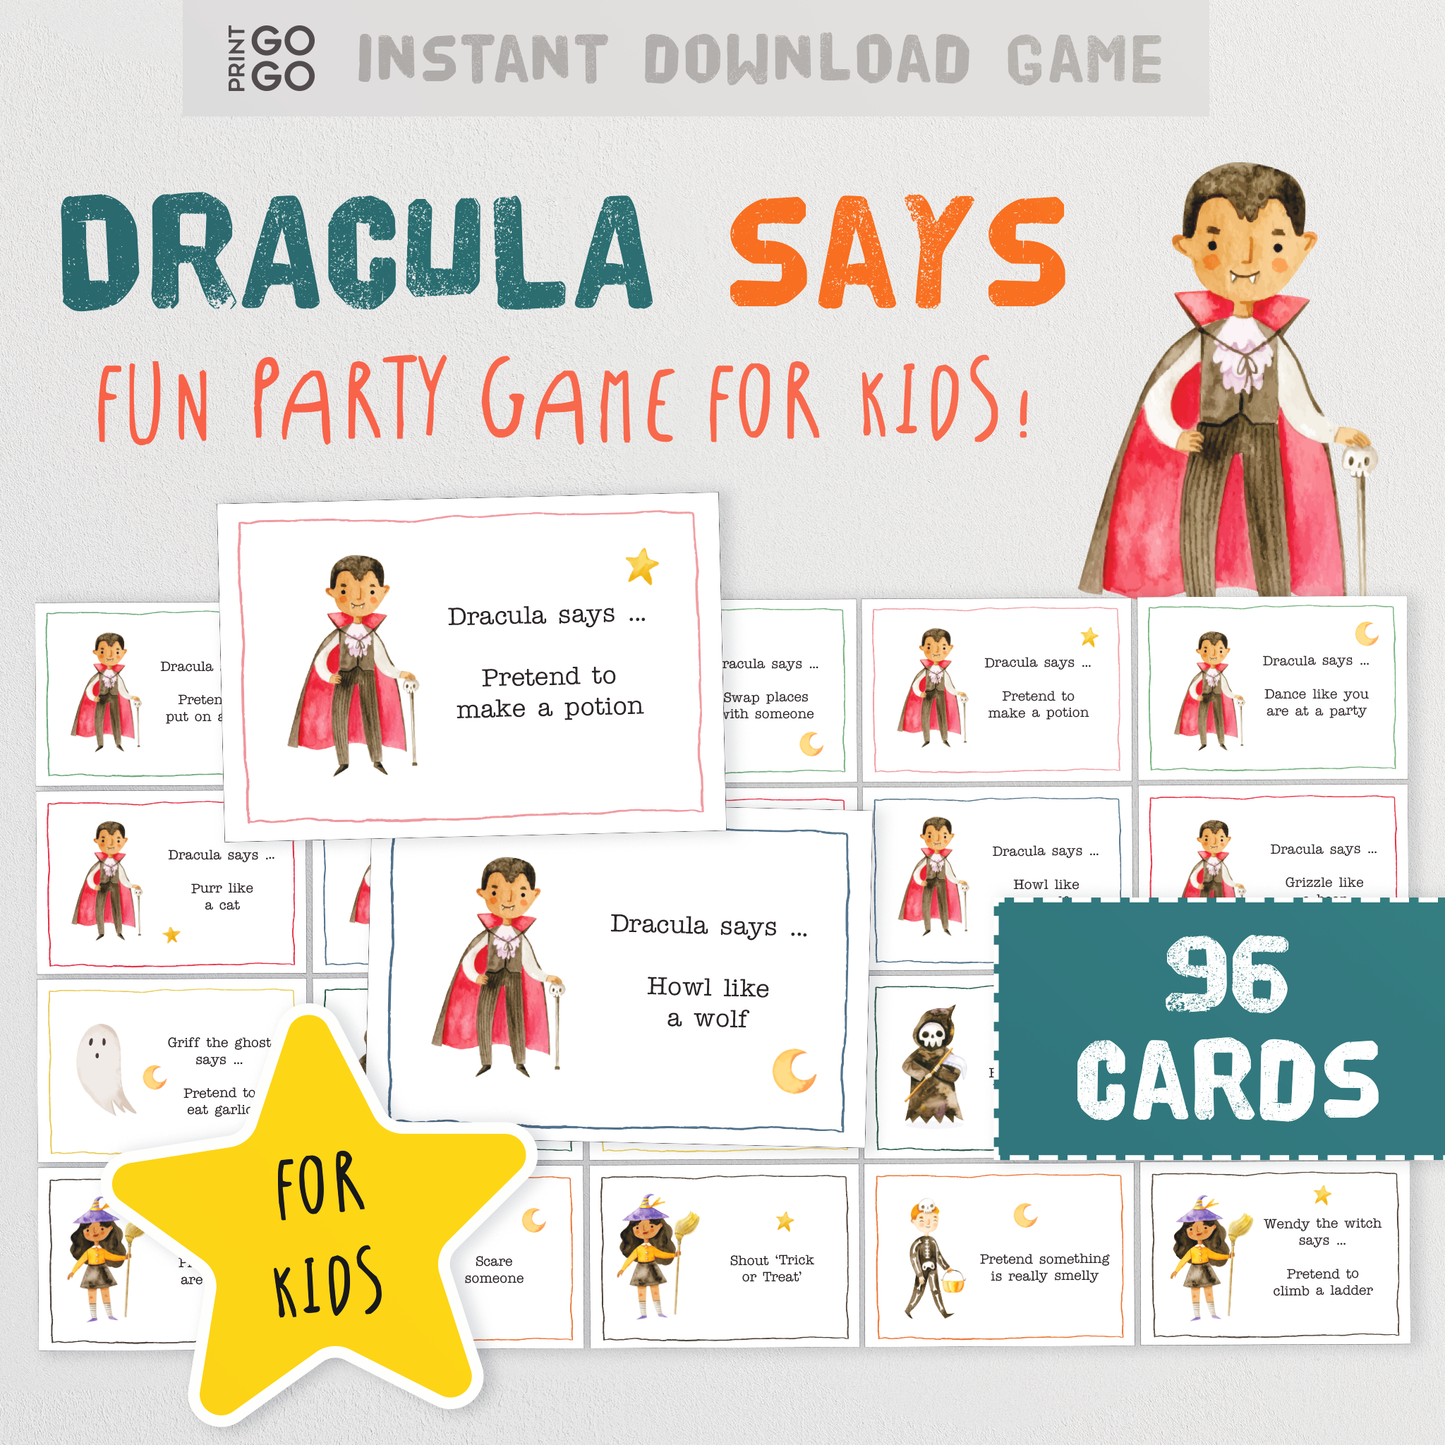 Dracula Says - The Fun Halloween Party Game for Kids!